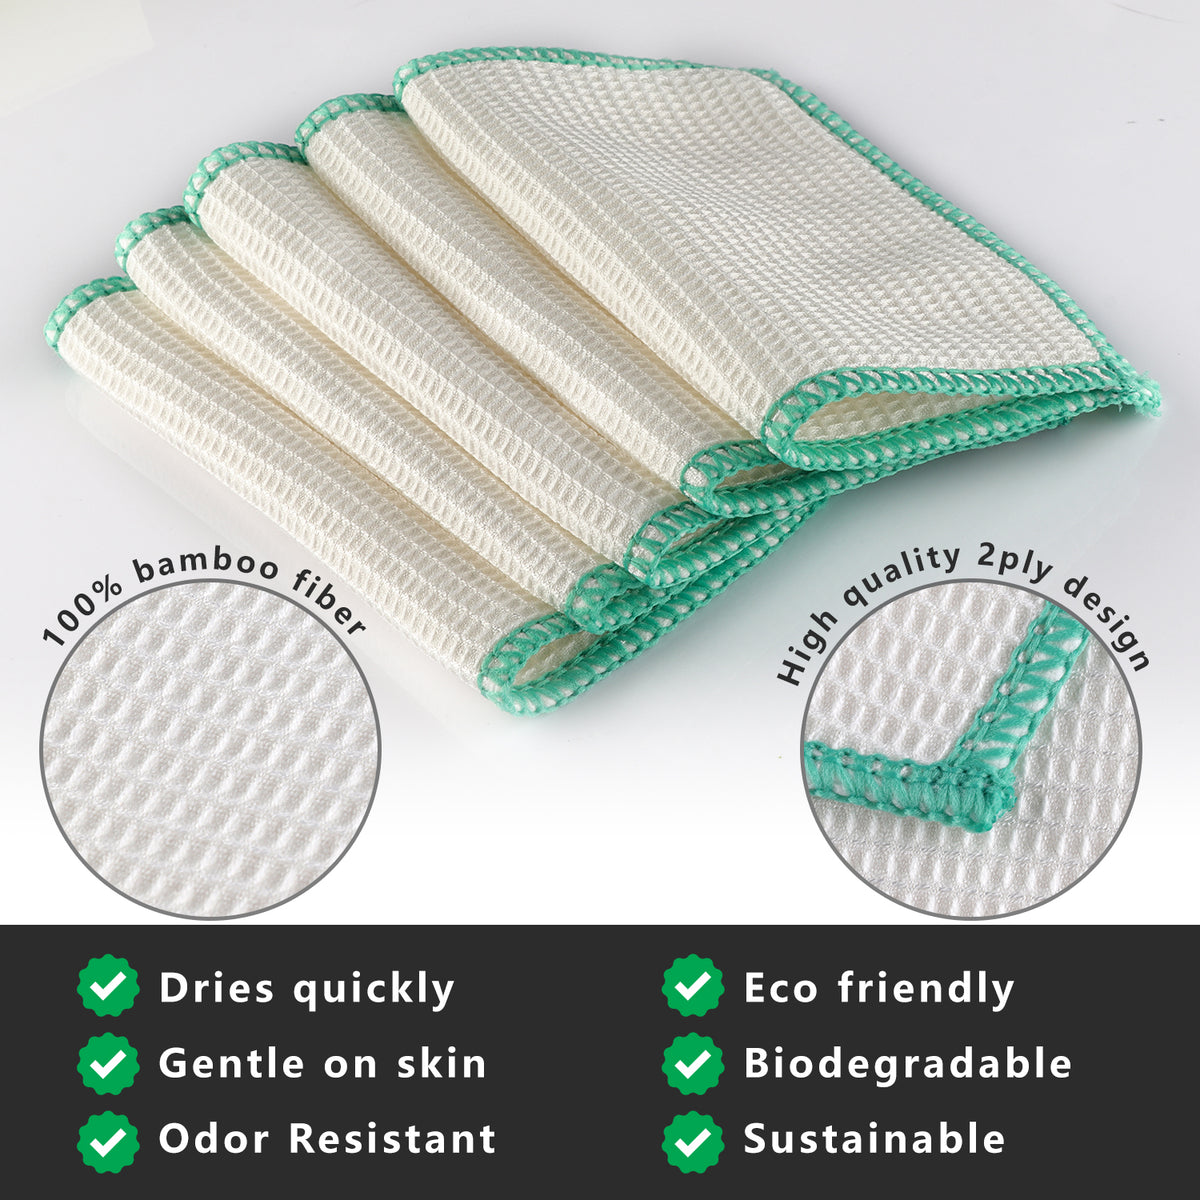 10 Pack Bamboo Kitchen Dishcloths - Eco-Friendly No Odor Reusable Premium Dish Clothes Super Absorbent Bamboo Cleaning Cloths Nonstick Oil Washable